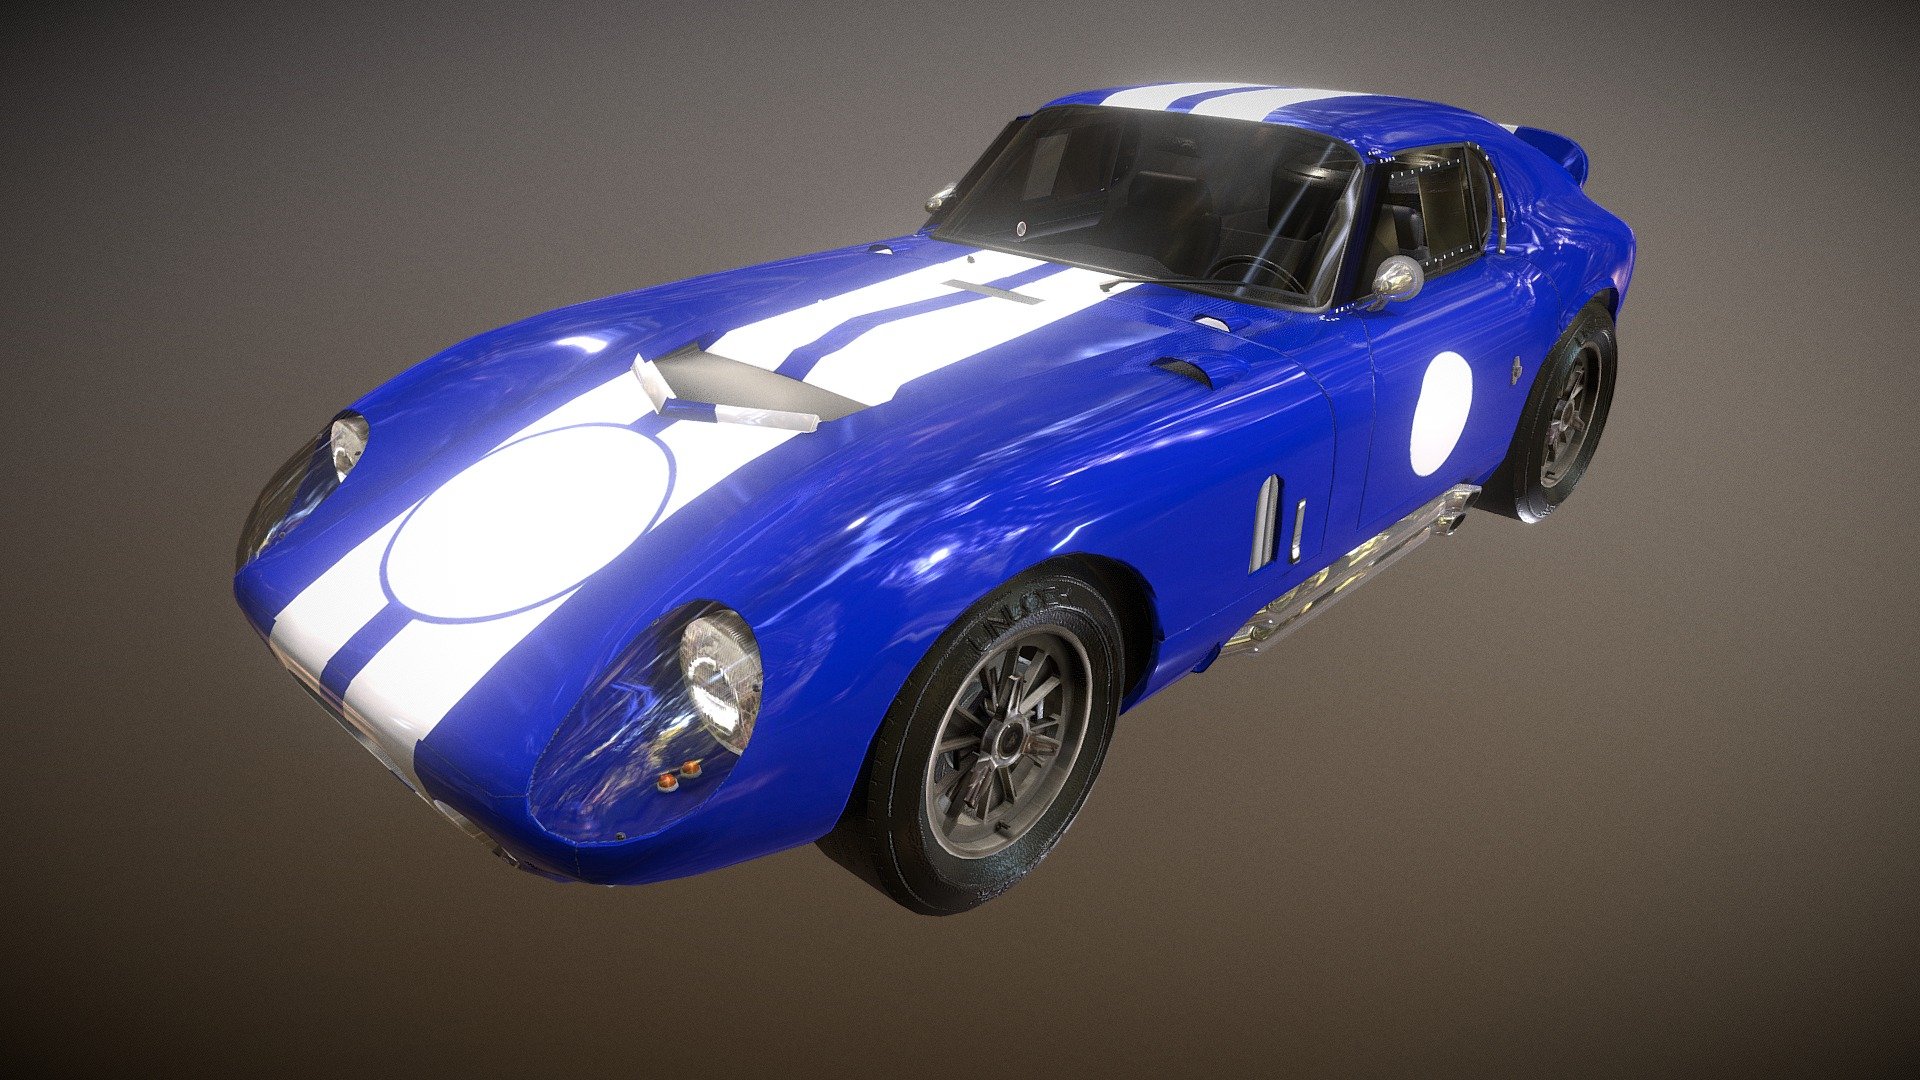 Subscribe and like my videos- Youtube.

https://www.youtube.com/channel/UCk6SVrjLxZofrigOtafpevA?view_as=subscriber

Classic car model for game.
 - Unlock classic car #06 - 3D model by UnlockGameAssets 3d model